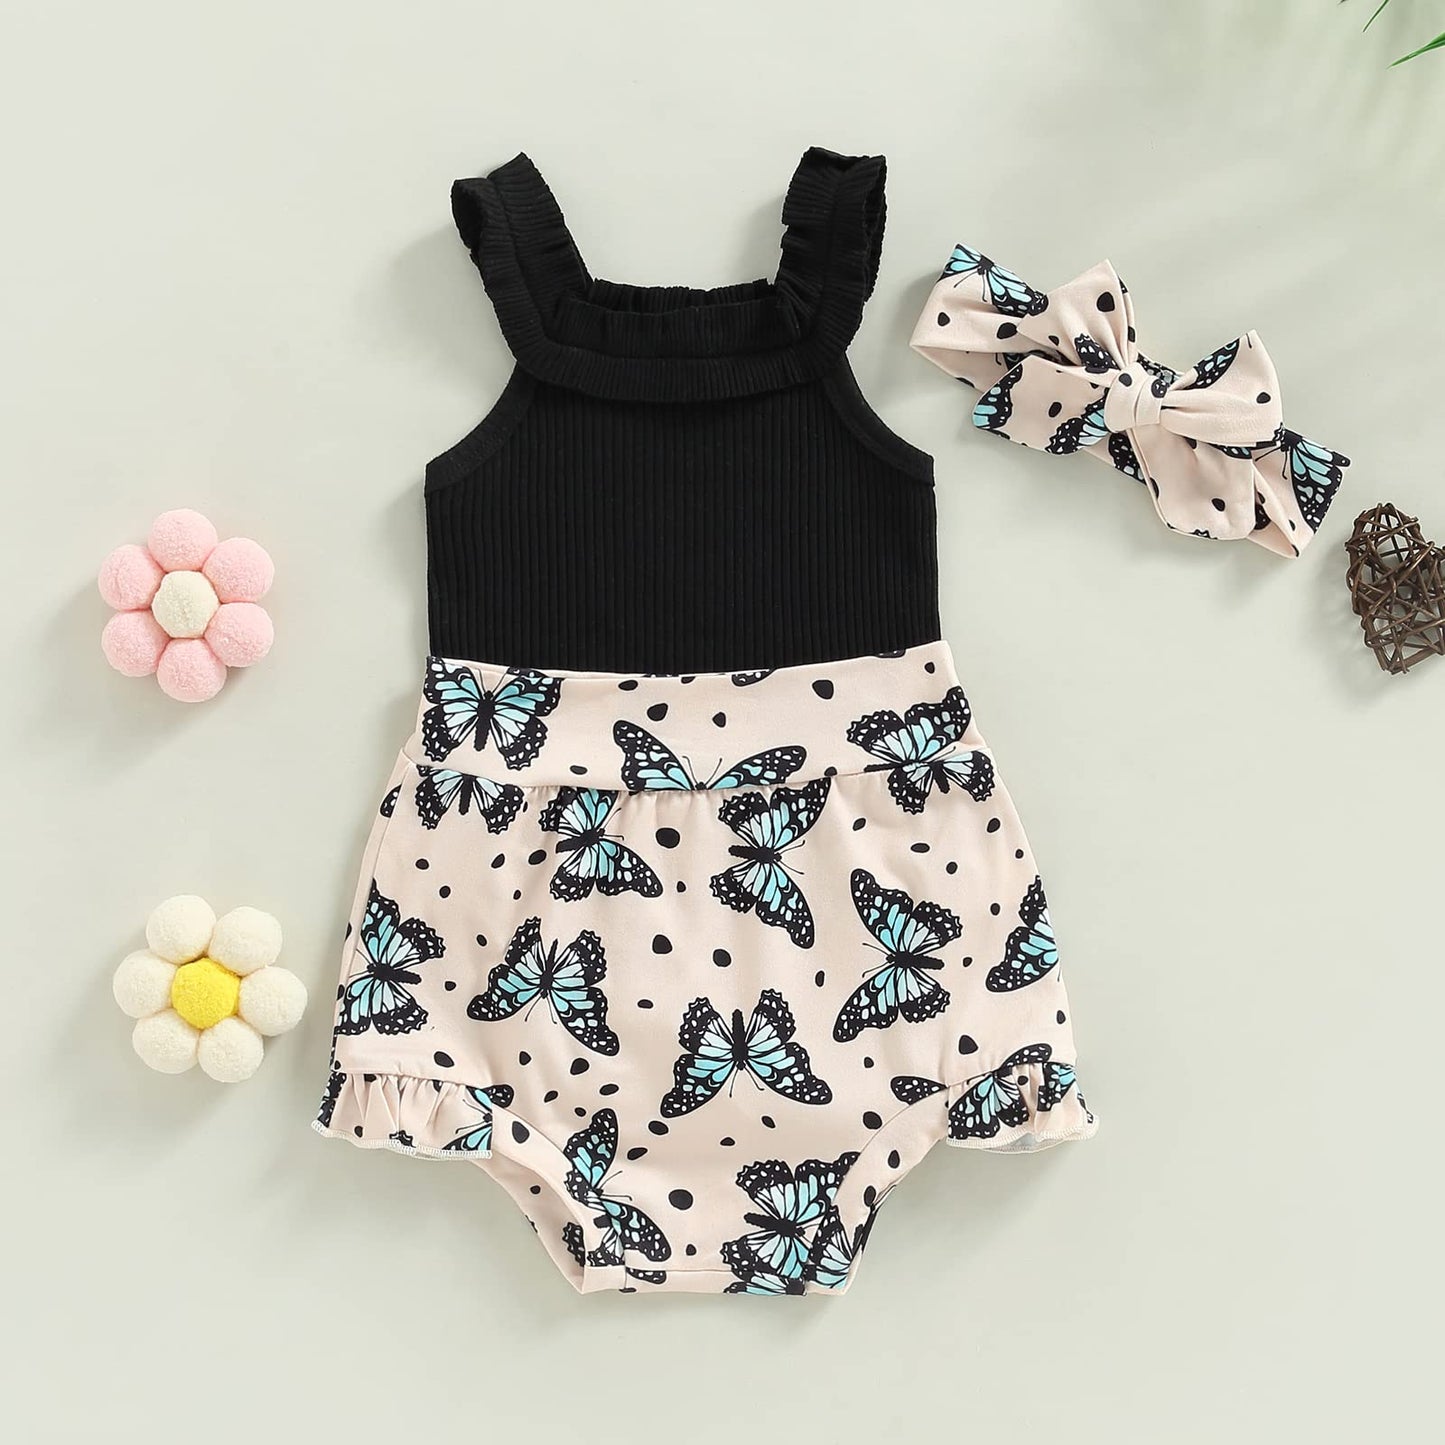 Sprifallbaby Infant Baby Girl Clothes Set Outfit Short Sleeve/Sleeveless Tops Toddler Girls Cute Shorts Bow Headband 3pcs (0-3 Months)